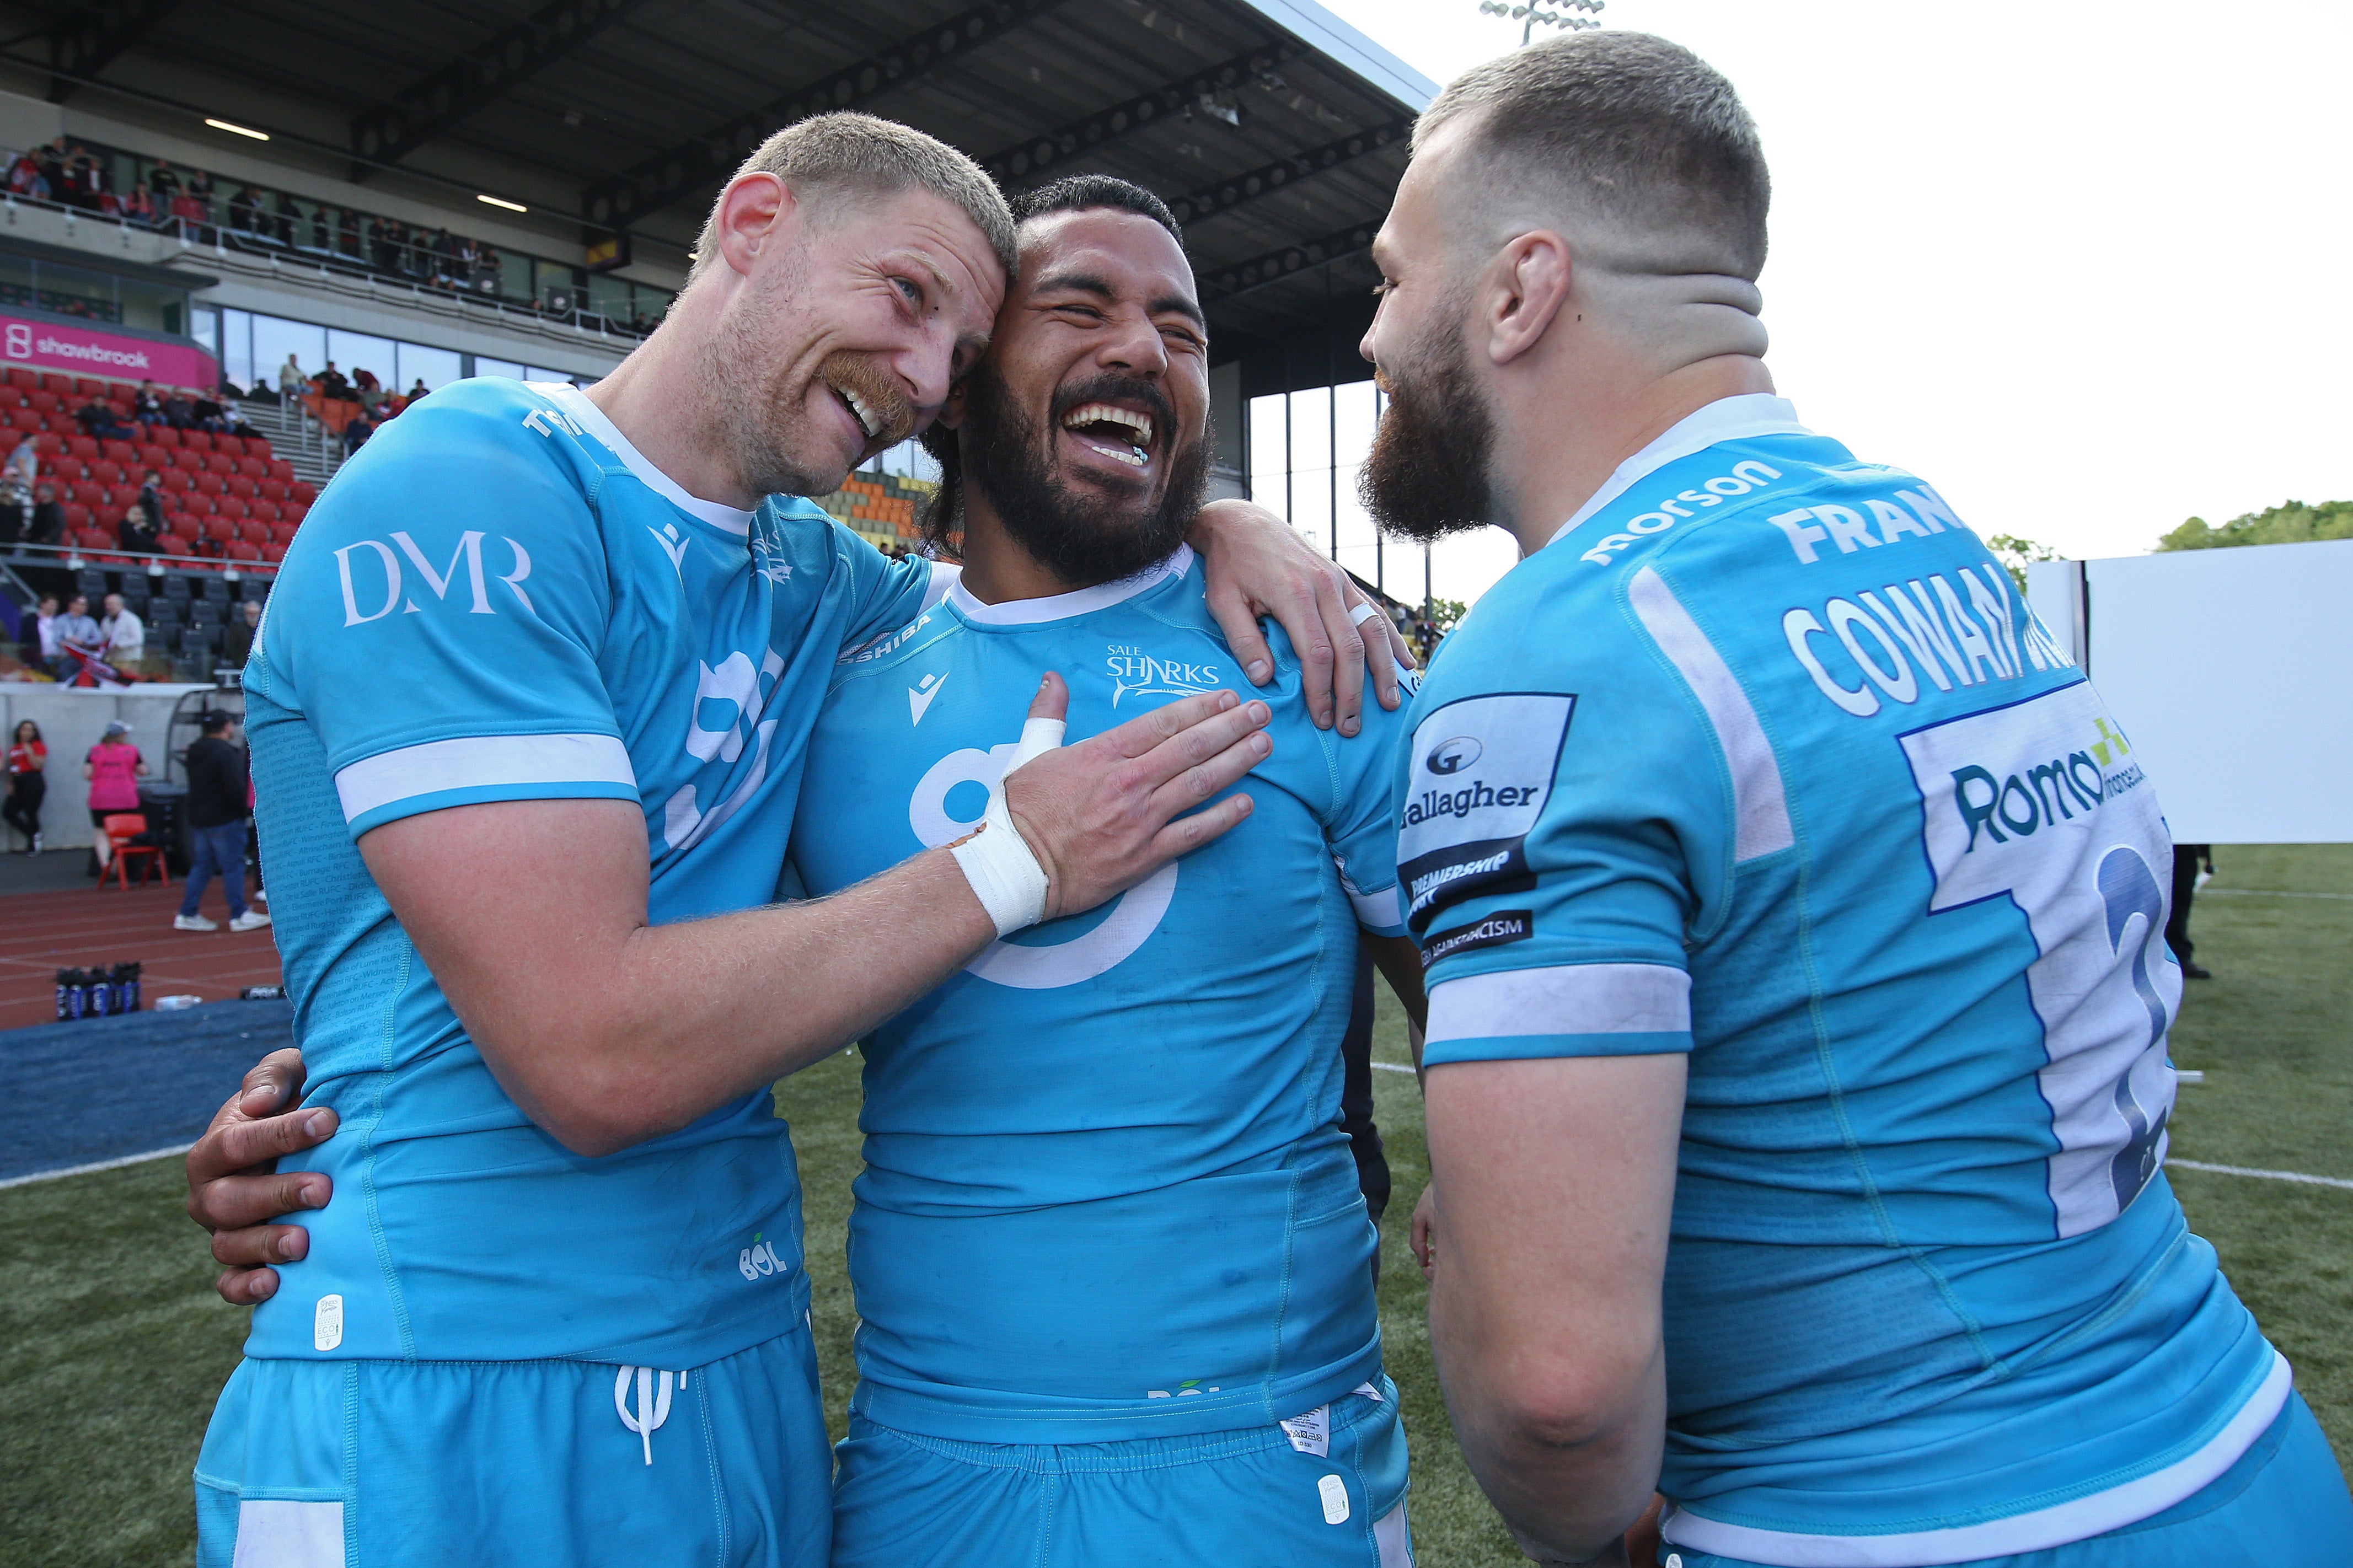 Rob du Preez, Manu Tuilagi and Luke Cowan-Dickie of Sale Sharks celebrate after the Gallagher Premiership Rugby match with Saracens